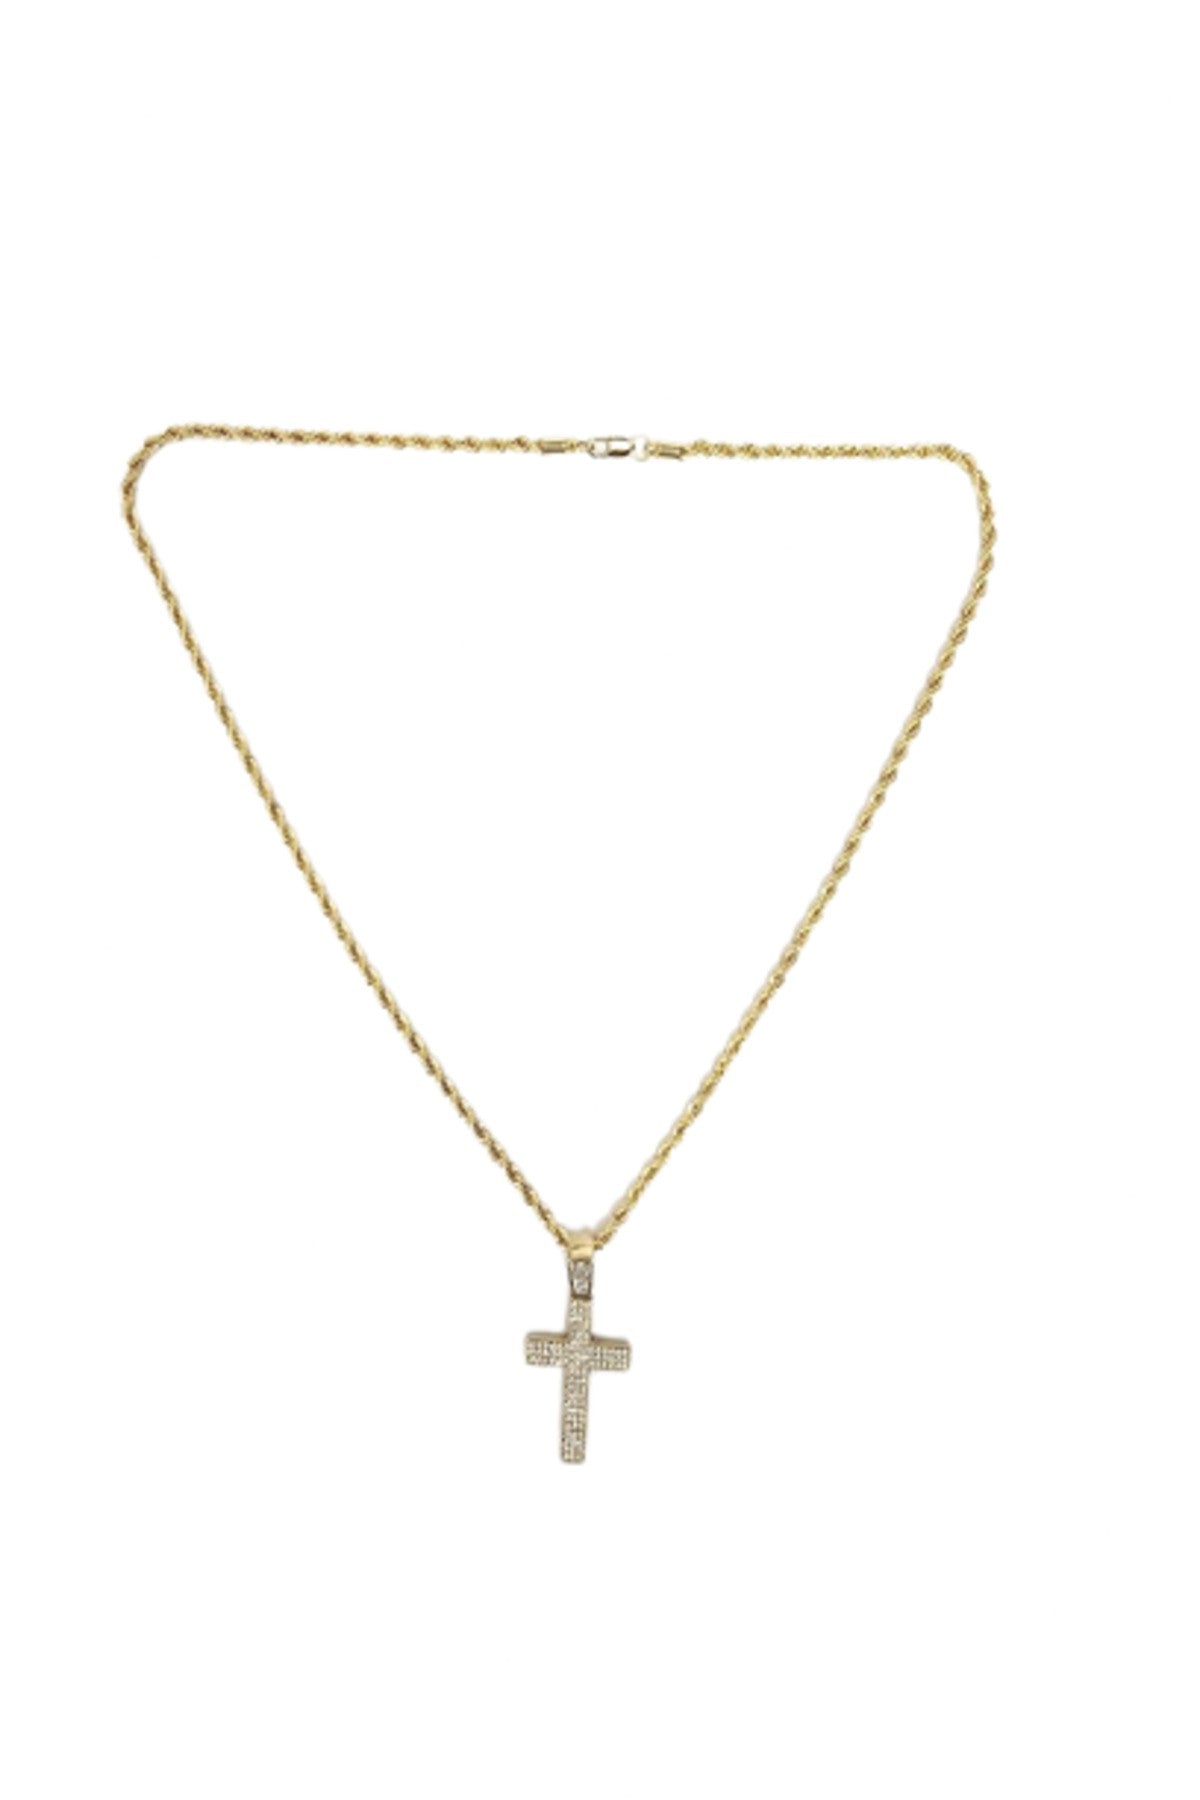 HIP HOP ICED OUT CROSS PENDANT CHAIN